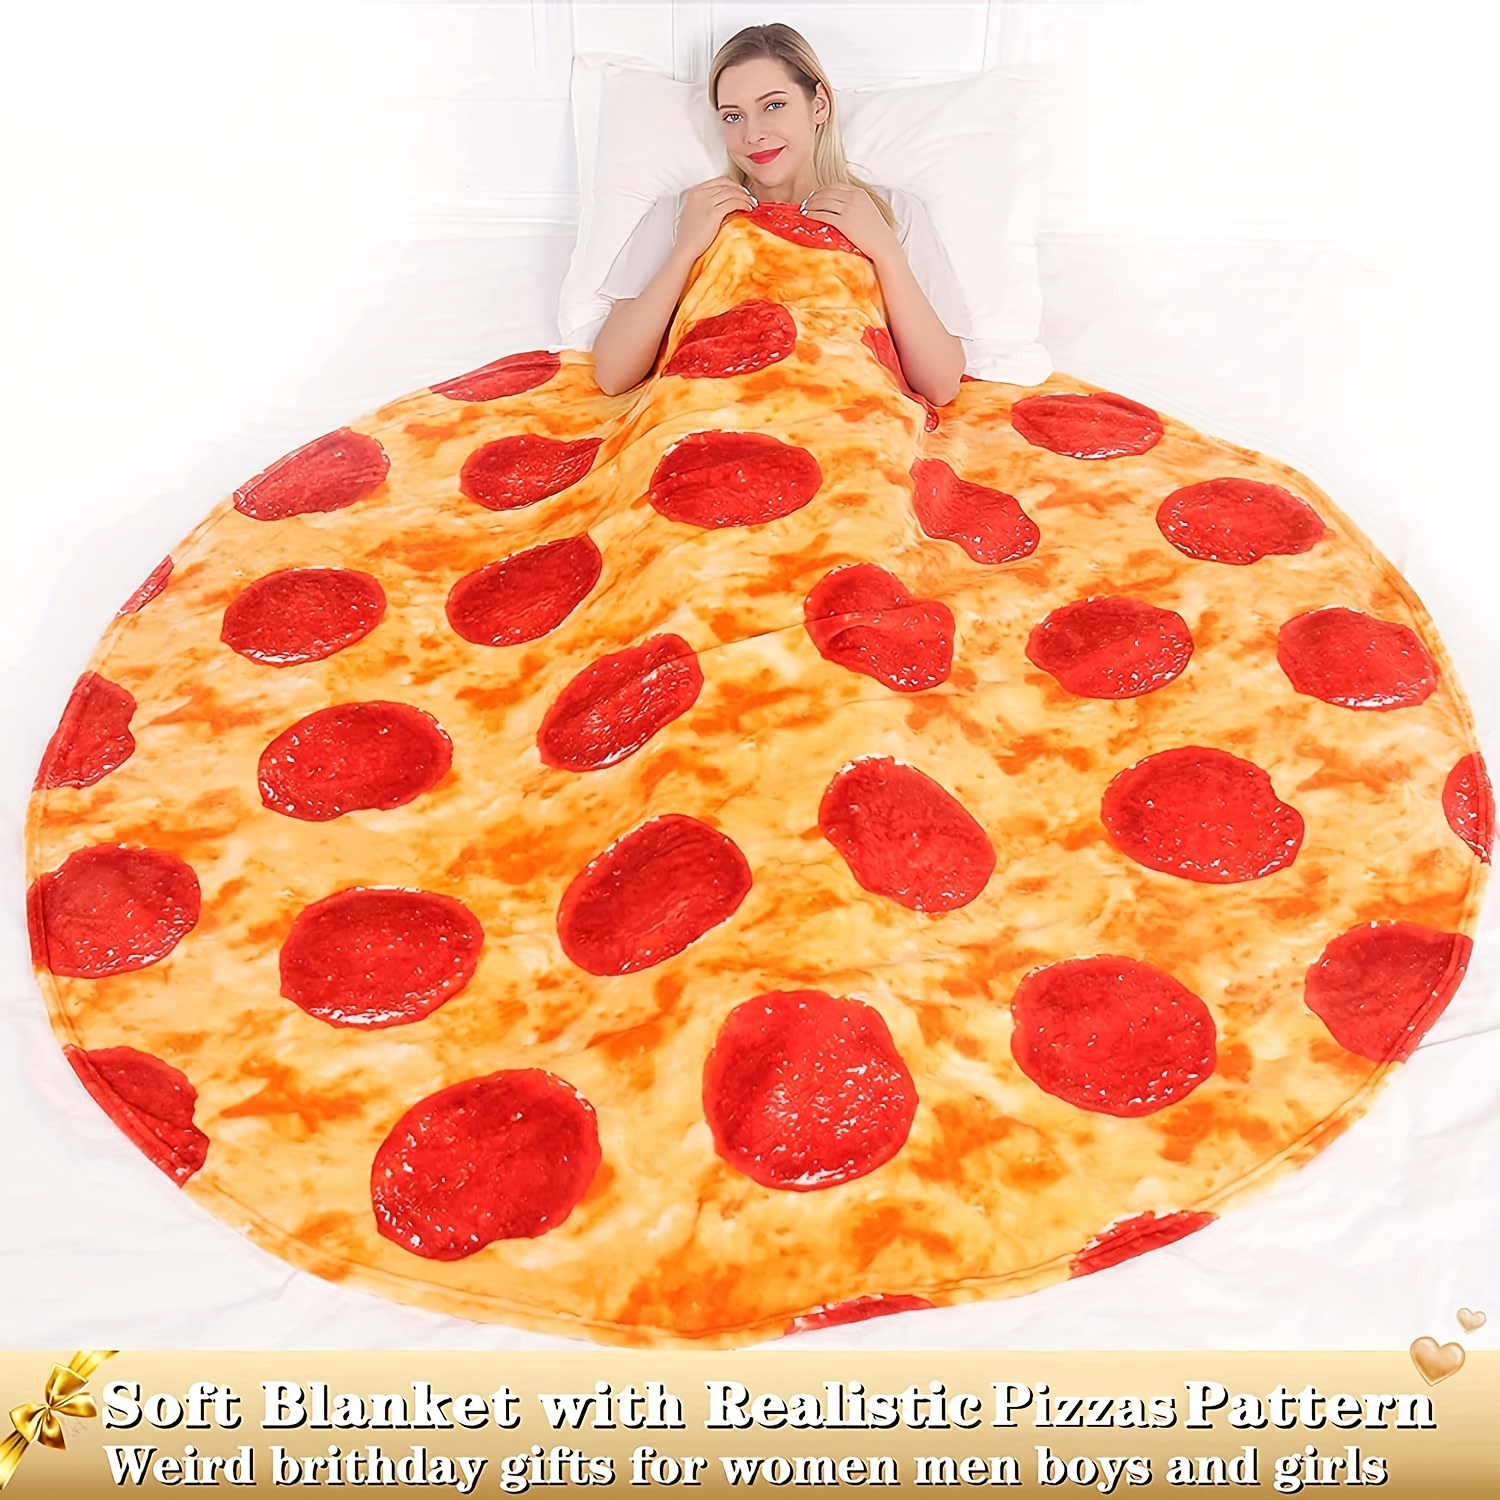 1pc Pizza Blanket Double Sided Pattern Food Blanket Novelty Realistic Funny  Throw Blanket, Soft Blanket For Couch Bed Sofa Office Camping